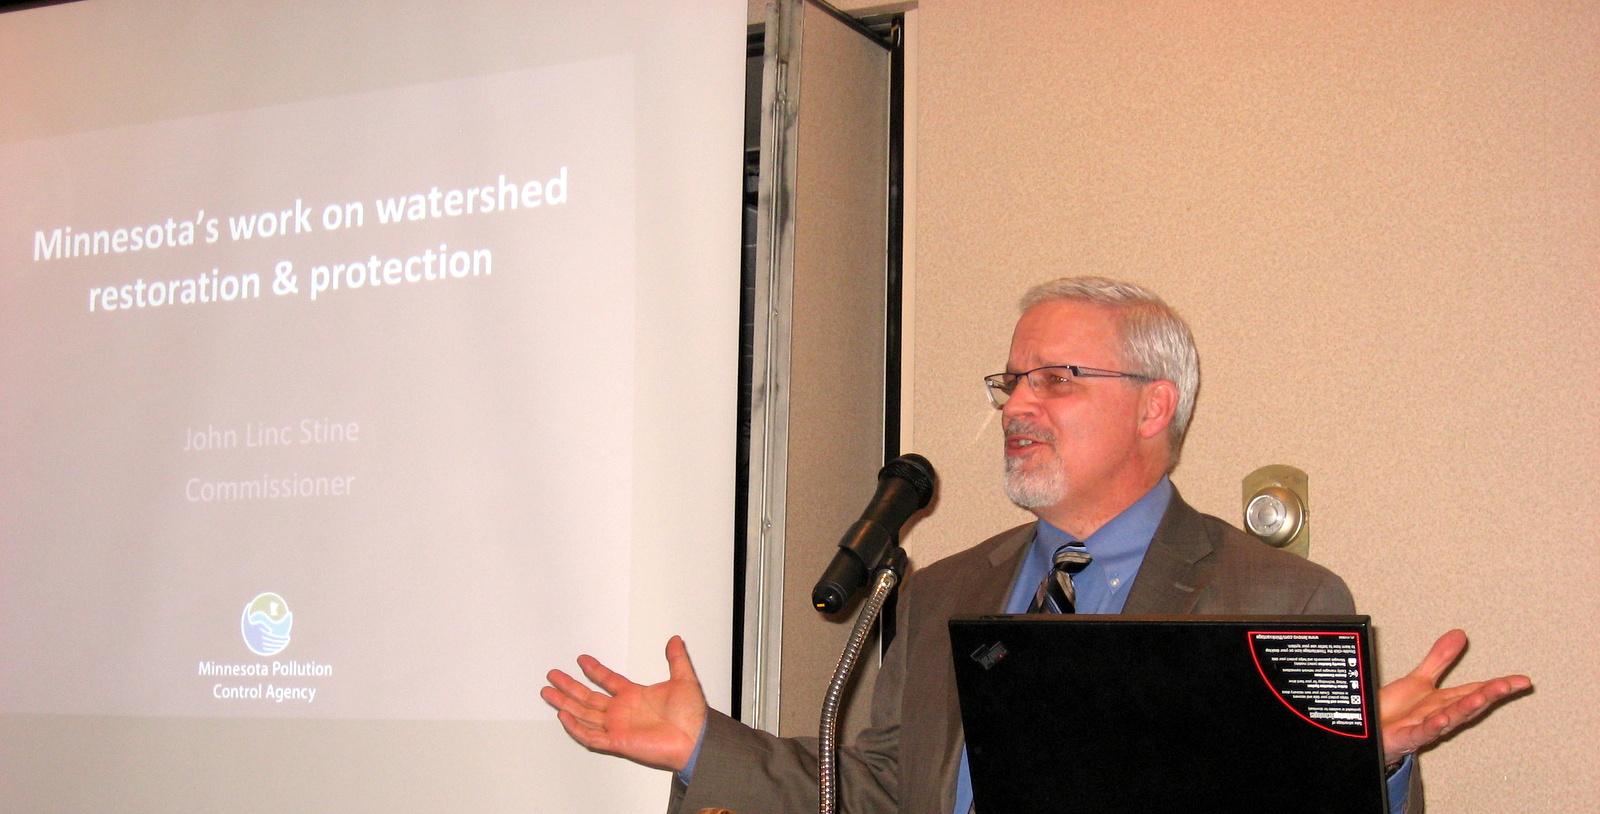 John Linc Stine, with the Minnesota Pollution Control Agency, speaks to Forum attendees.